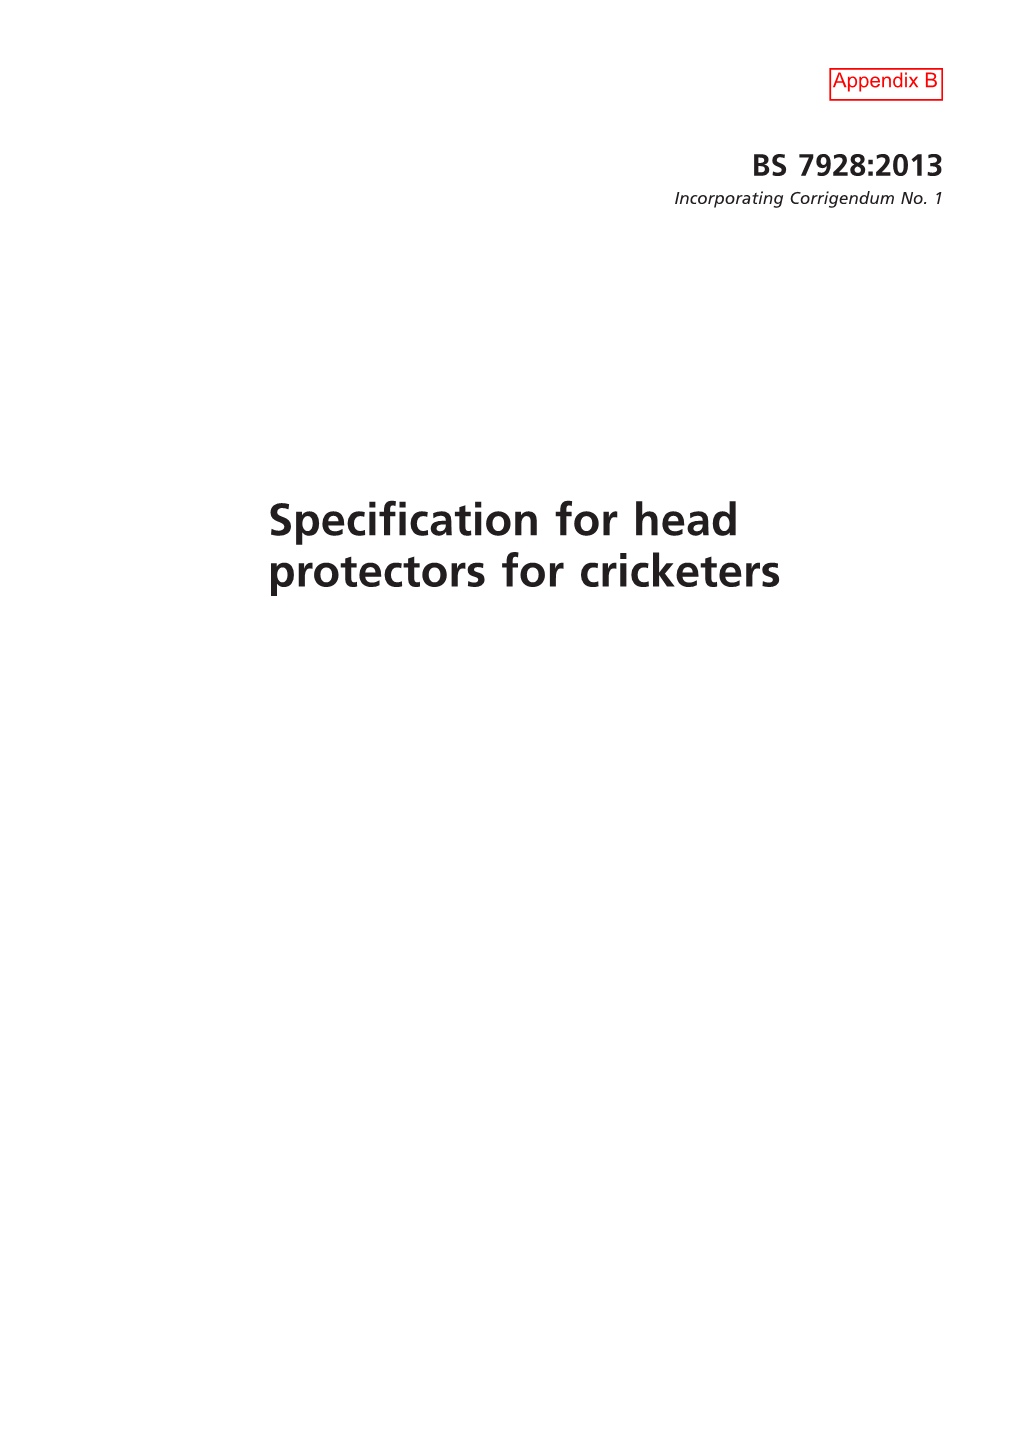 Specification for Head Protectors for Cricketers BS 7928:2013 BRITISH STANDARD